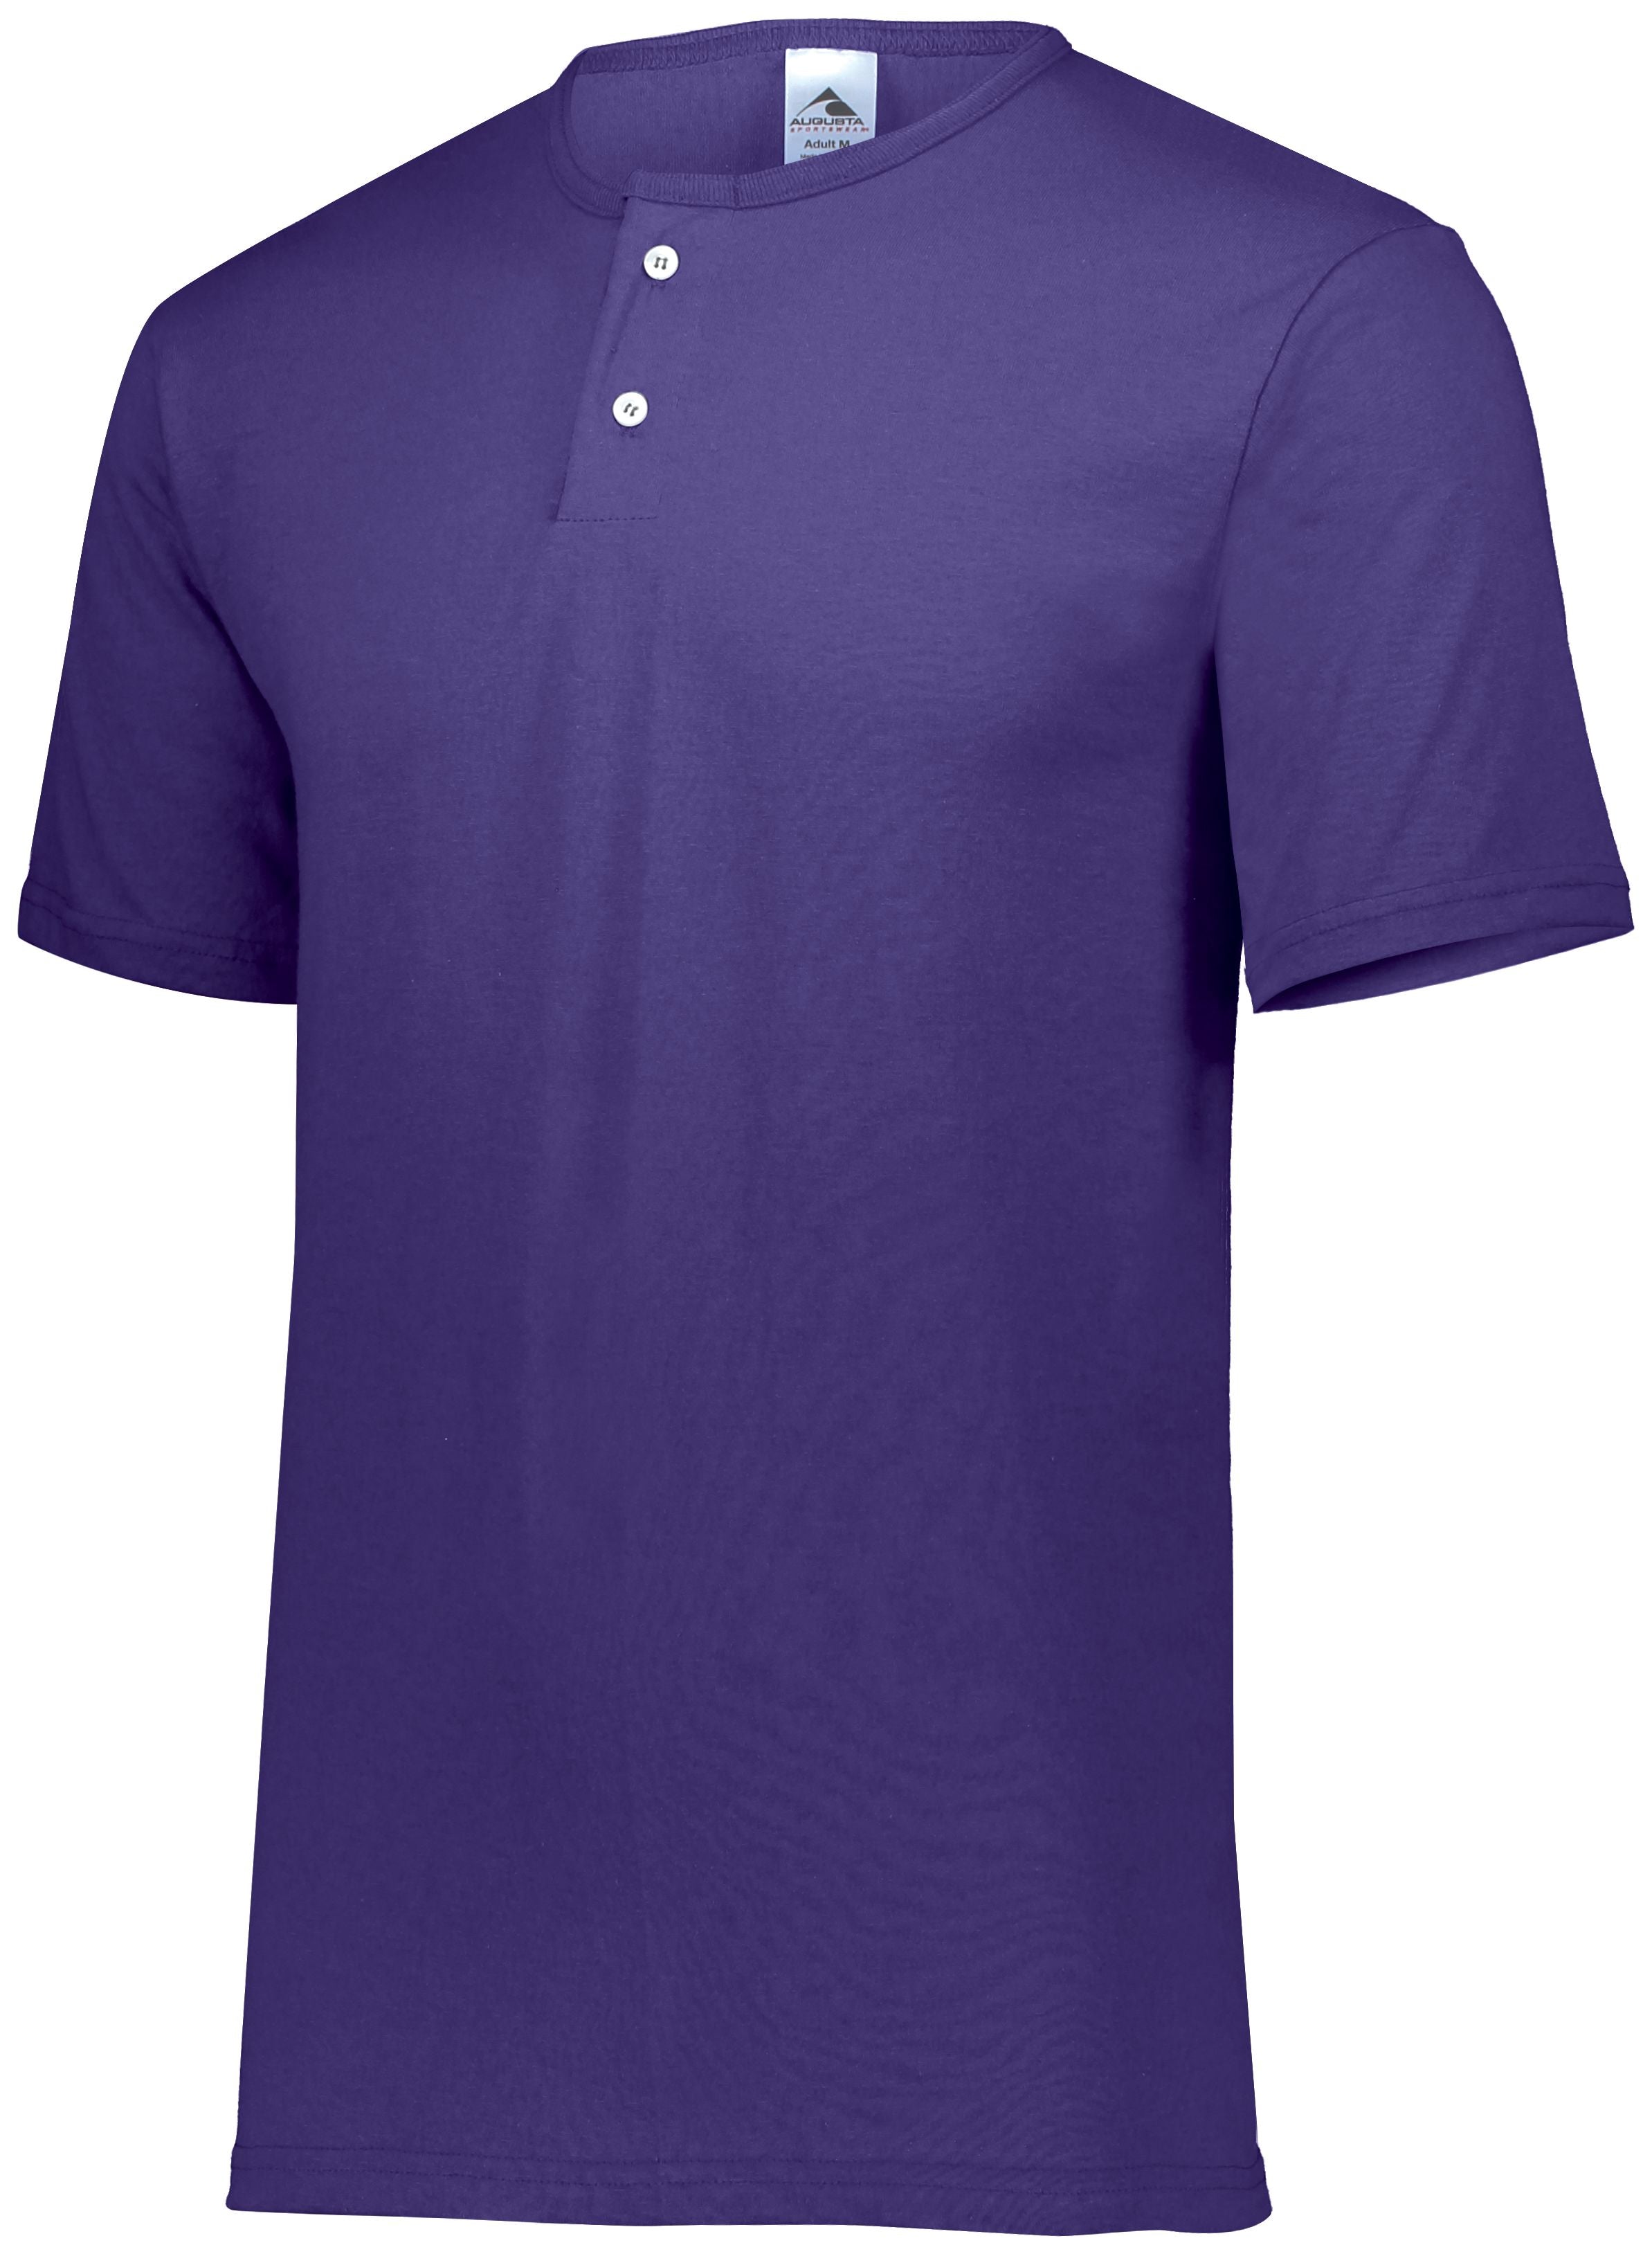 Augusta Sportswear Youth Two-Button Baseball Jersey in Purple  -Part of the Youth, Youth-Jersey, Augusta-Products, Baseball, Shirts, All-Sports, All-Sports-1 product lines at KanaleyCreations.com